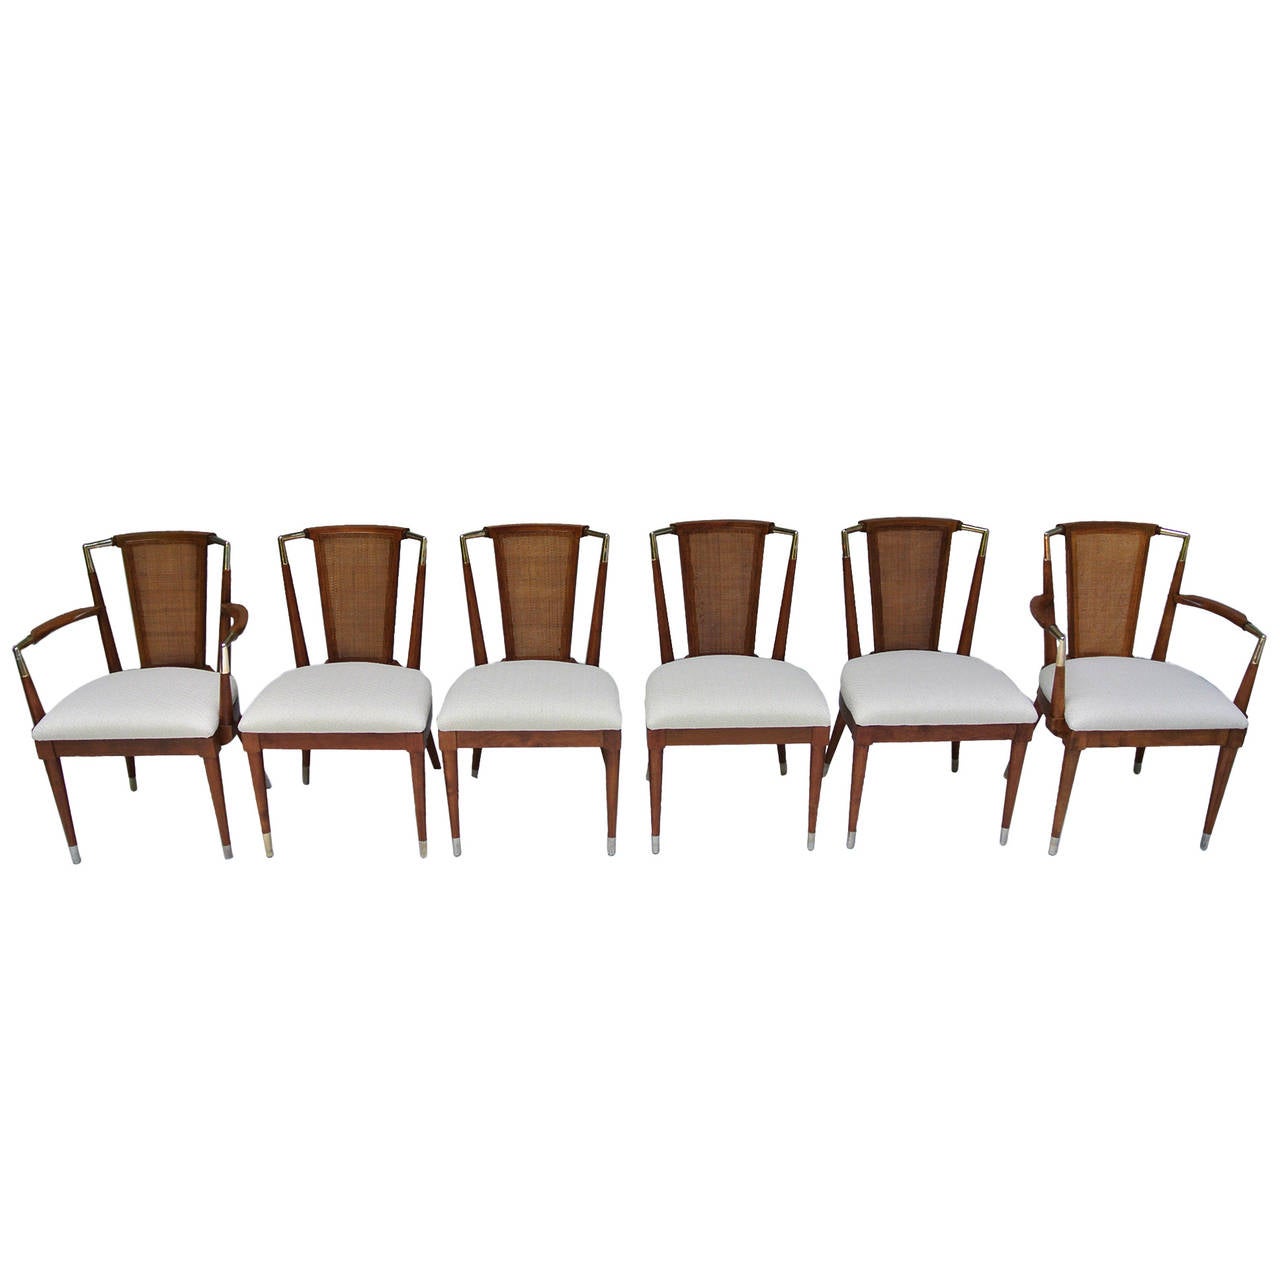 Six cane and brass dining chairs Bert England Forward Trend line for Johnson Furniture Company in the 1950s. 
The six cherrywood caned back dining chairs with brass sabots and brass crest rail and armrest details.
All of the metal pieces are brass